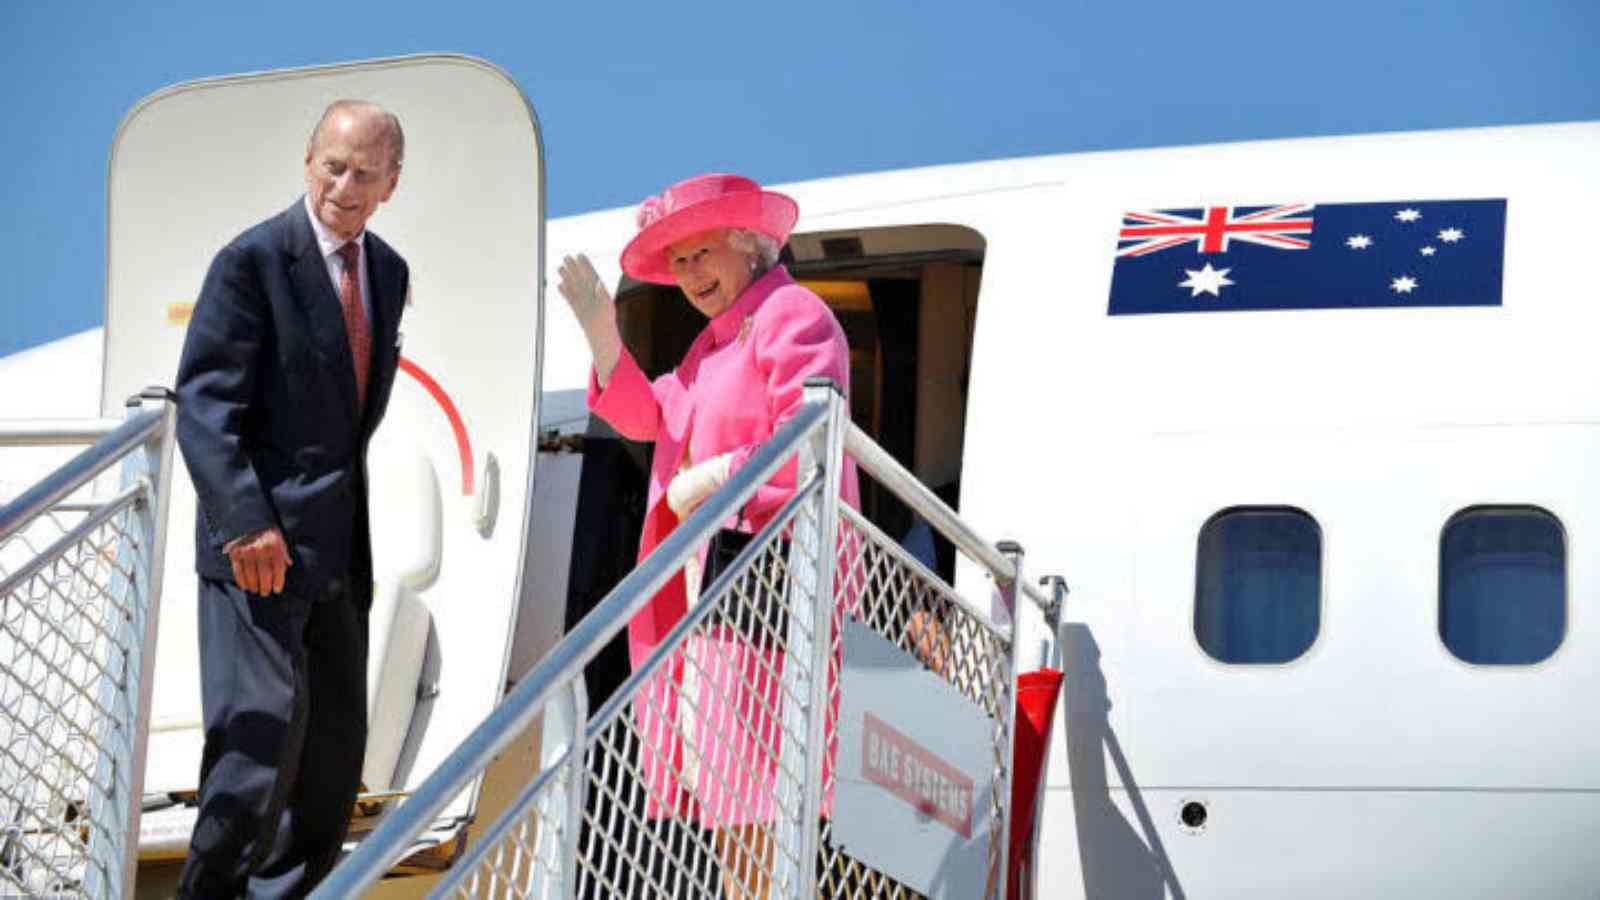 Queen Elizabeth II can travel the world without a passport